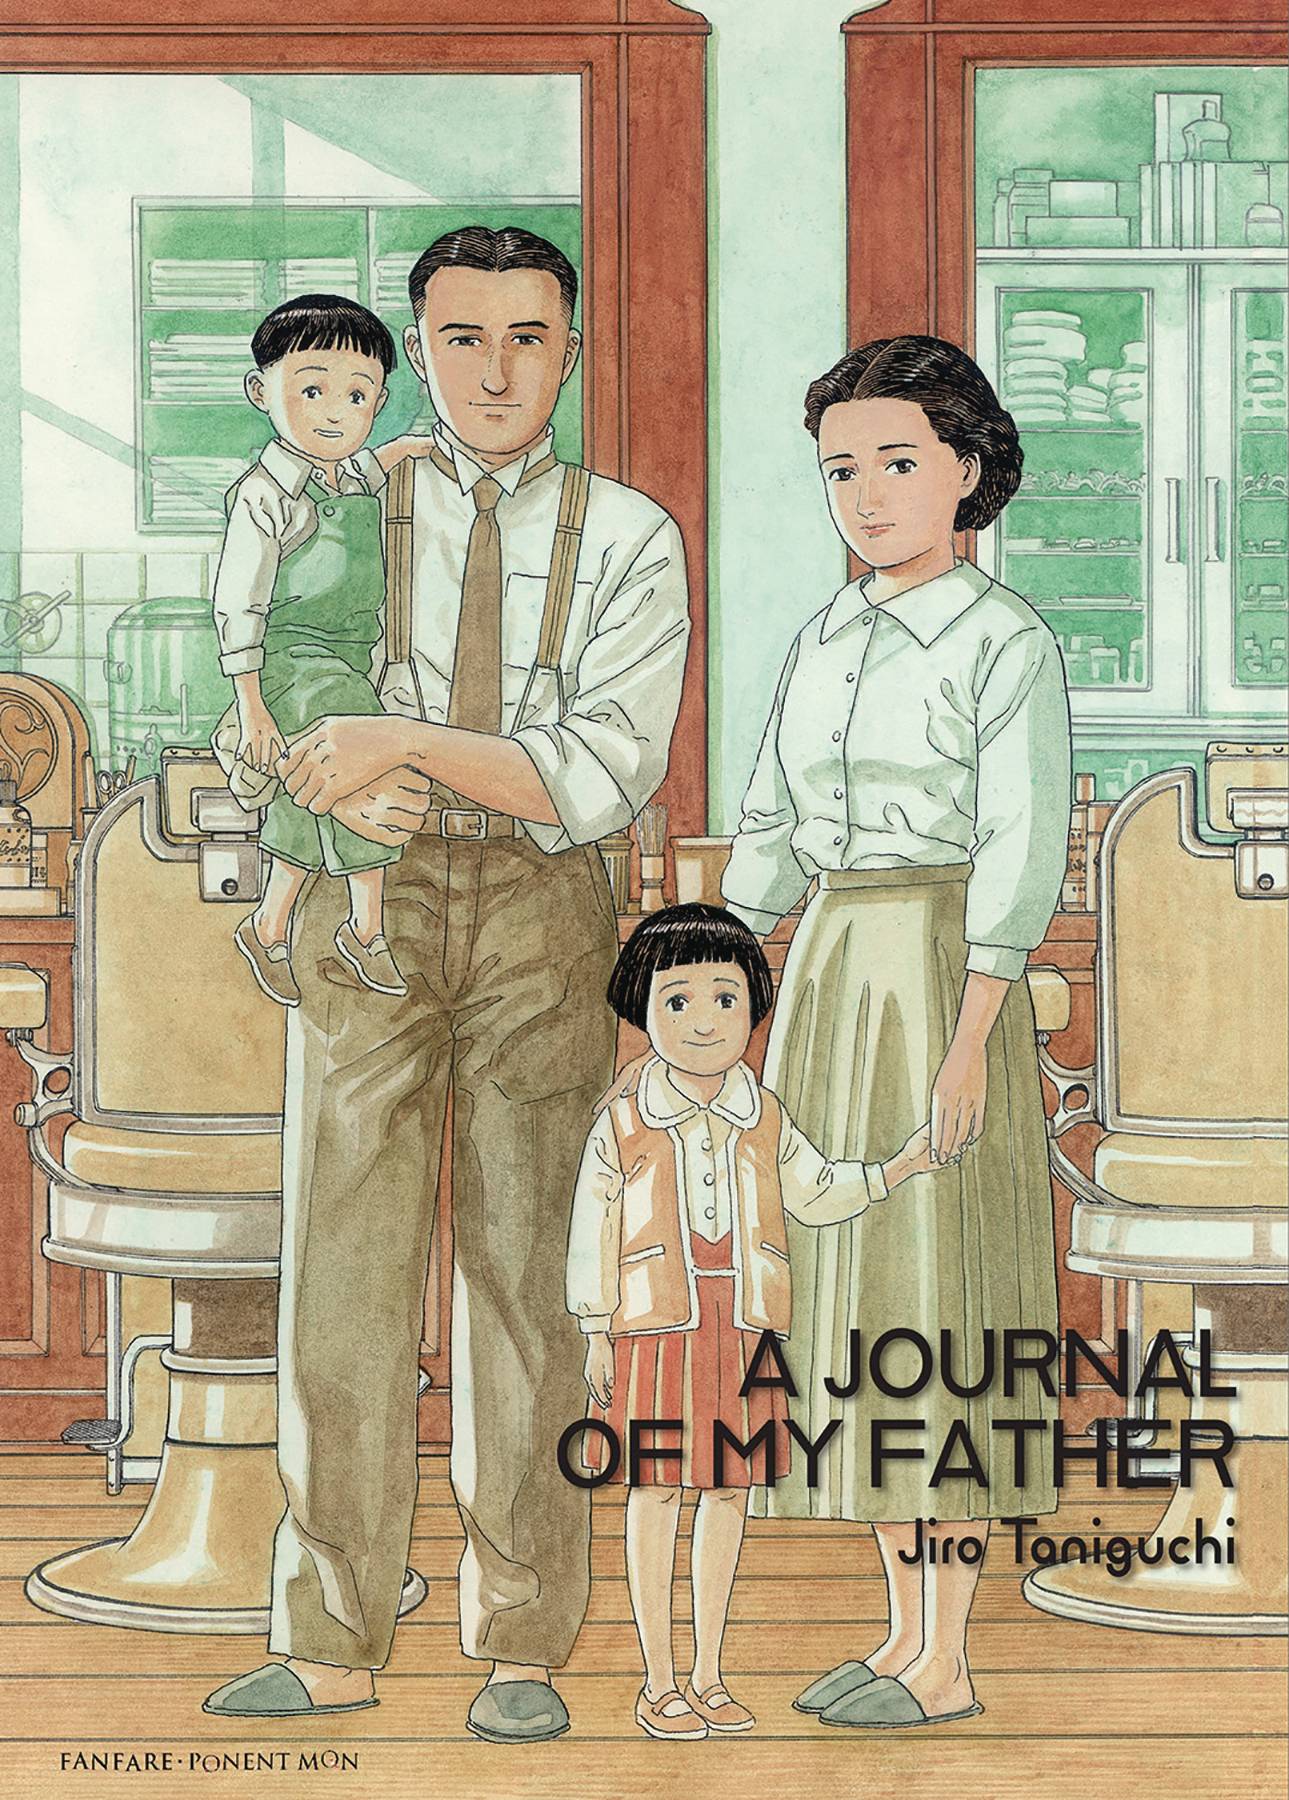 A family stands in an old-fashioned barber shop. The mother and father wear simple taupe and white clothing reminiscent of the 1940s. The father holds a young boy in green overalls within his arms, while the mother holds the hand of a slightly older girl wearing a pink and white dress.